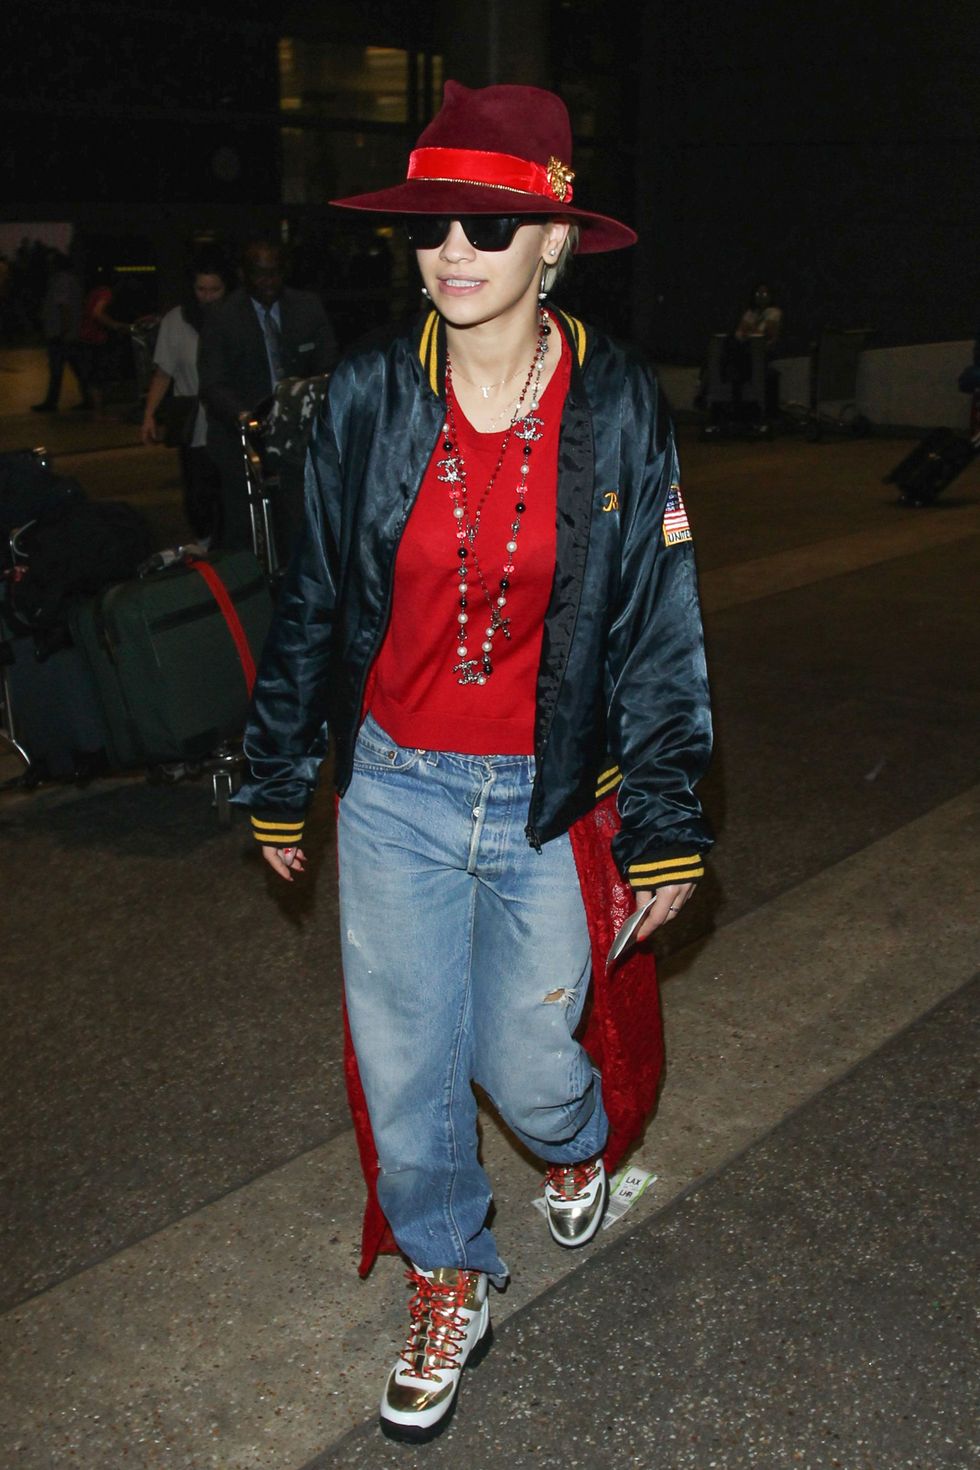 LOS ANGELES, CA - OCTOBER 20: Rita Ora seen at LAX on October 20, 2014 in Los Angeles, California.  (Photo by GVK/Bauer-Griffin/GC Images)